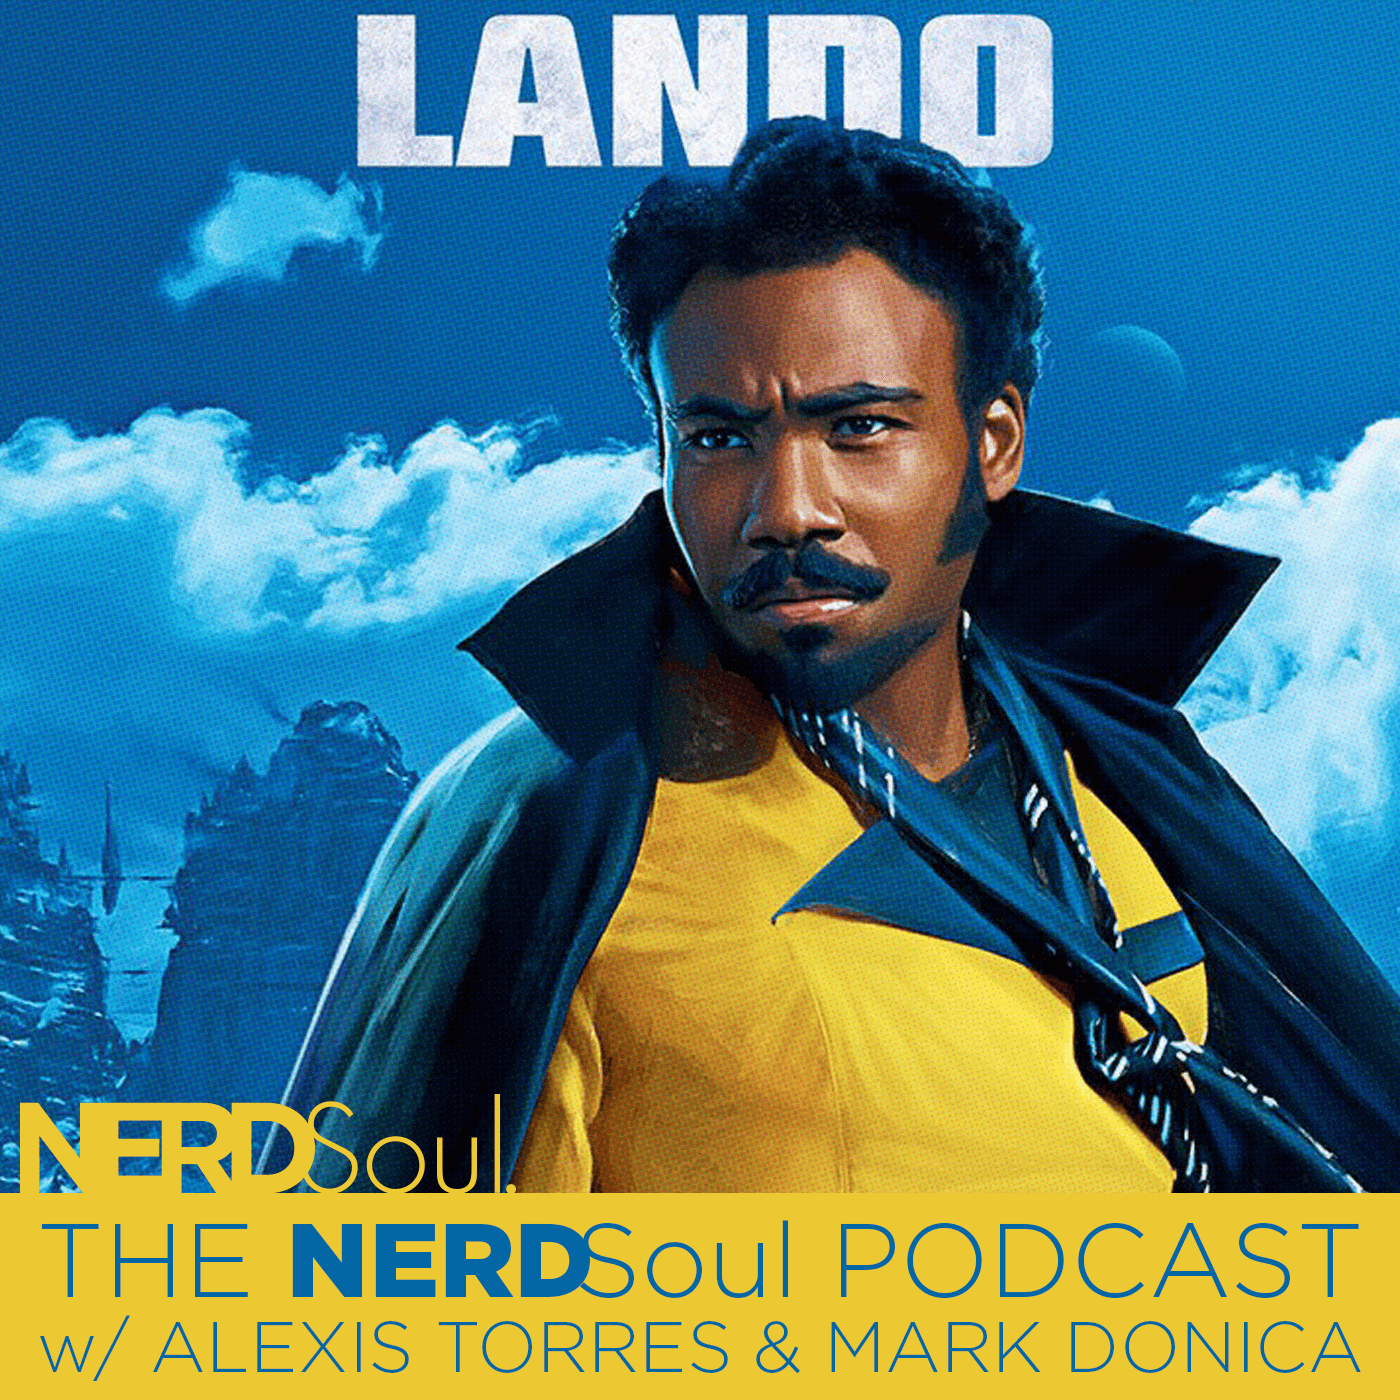 PTX Stay Fresh, The Purge Franchise, Eric Nam's Potion, Star Wars Solo Rolls Eyes, Shaq Fu = Bad Look & More on The #NERDSoul #Podcast